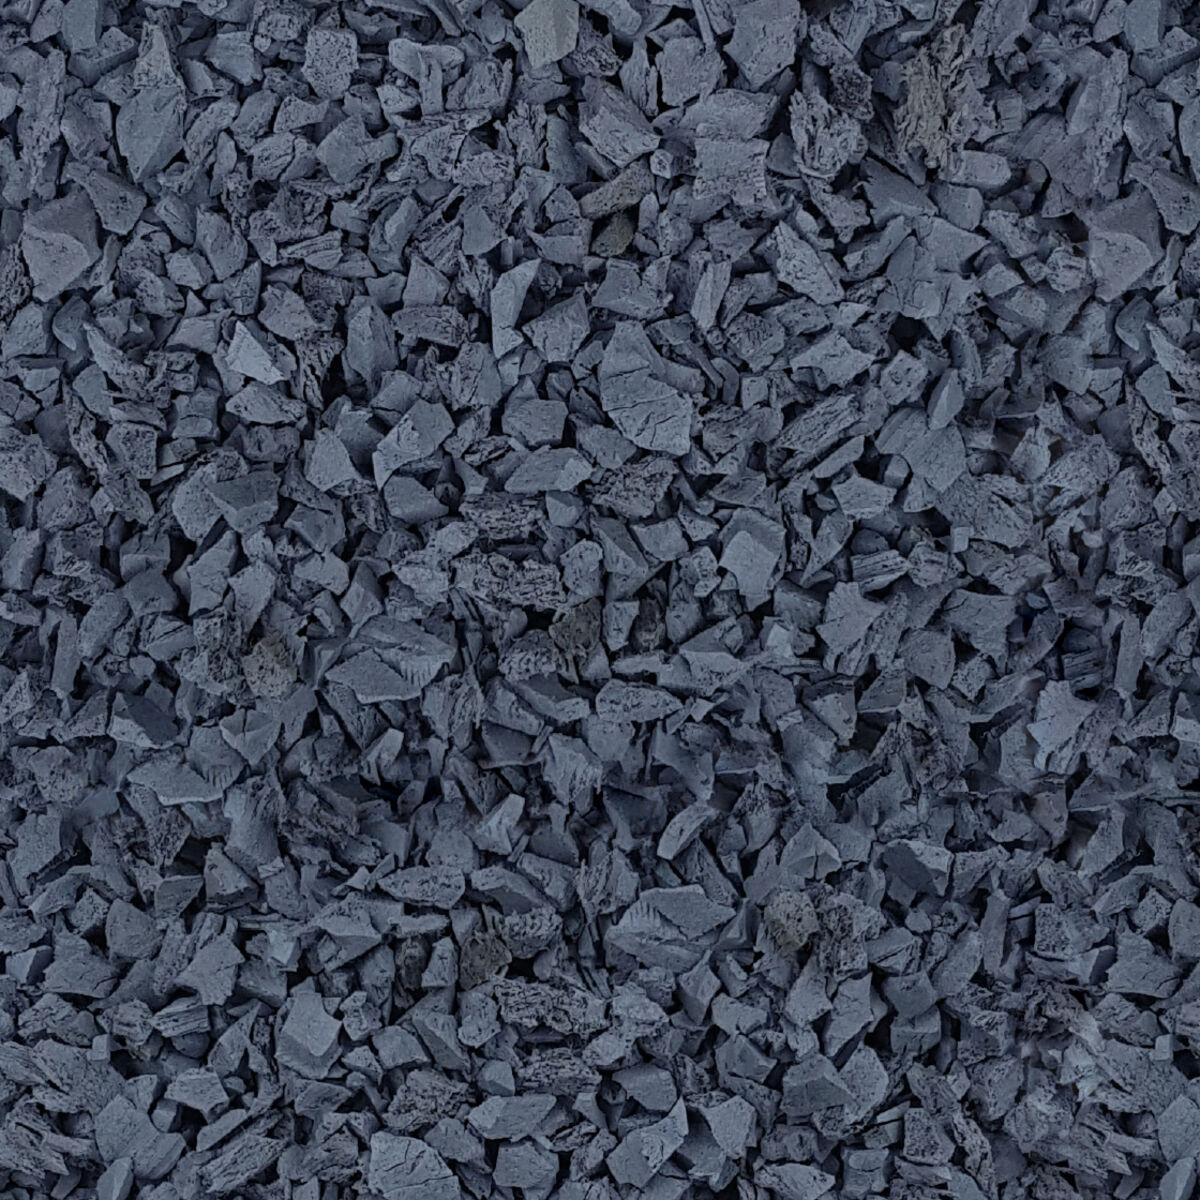 ECO_RC Rubber Chippings WEB.jpg